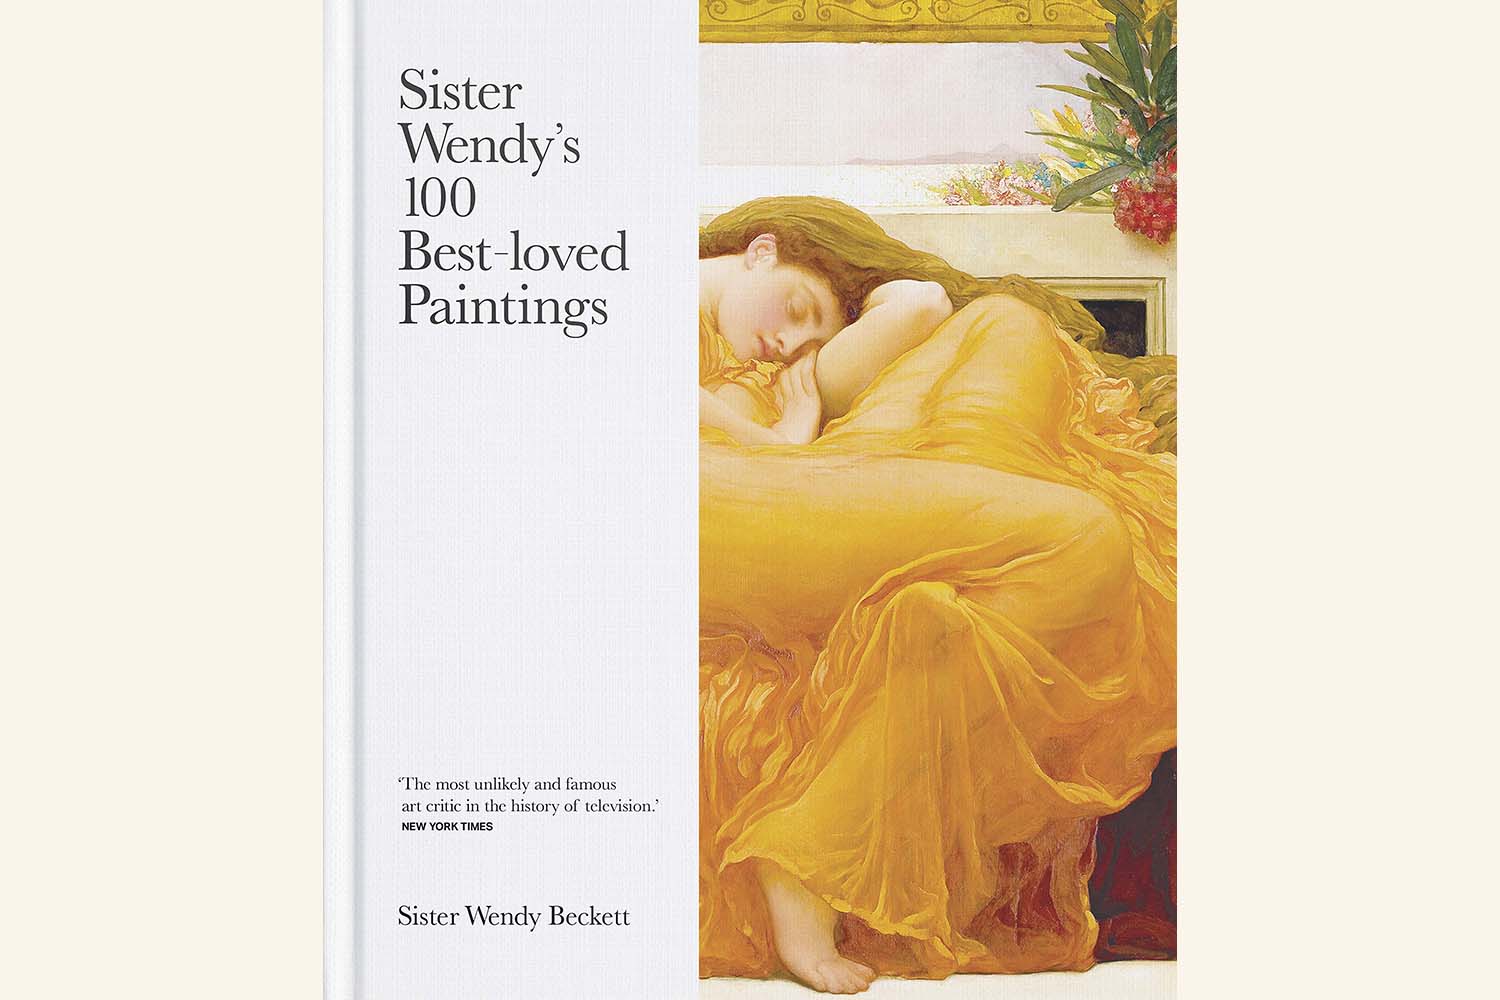 The Best Art History Books Every Art Lover Should Read: 100 Best-loved Paintings, by Sister Wendy